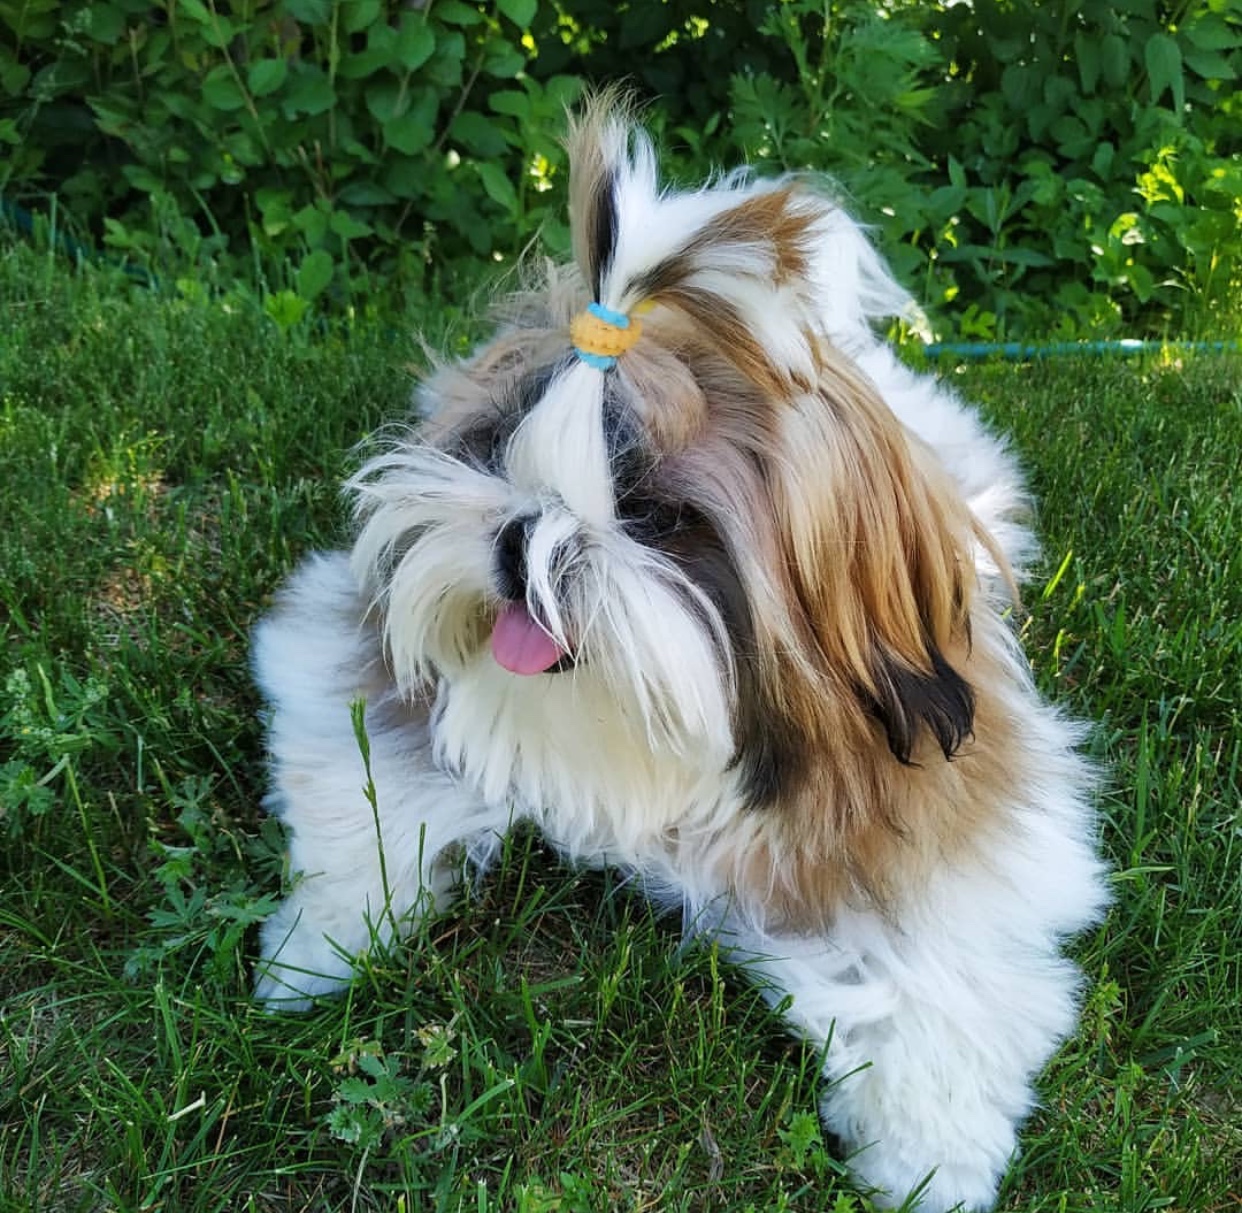 A Shih Tzu lying on the grass in the garden